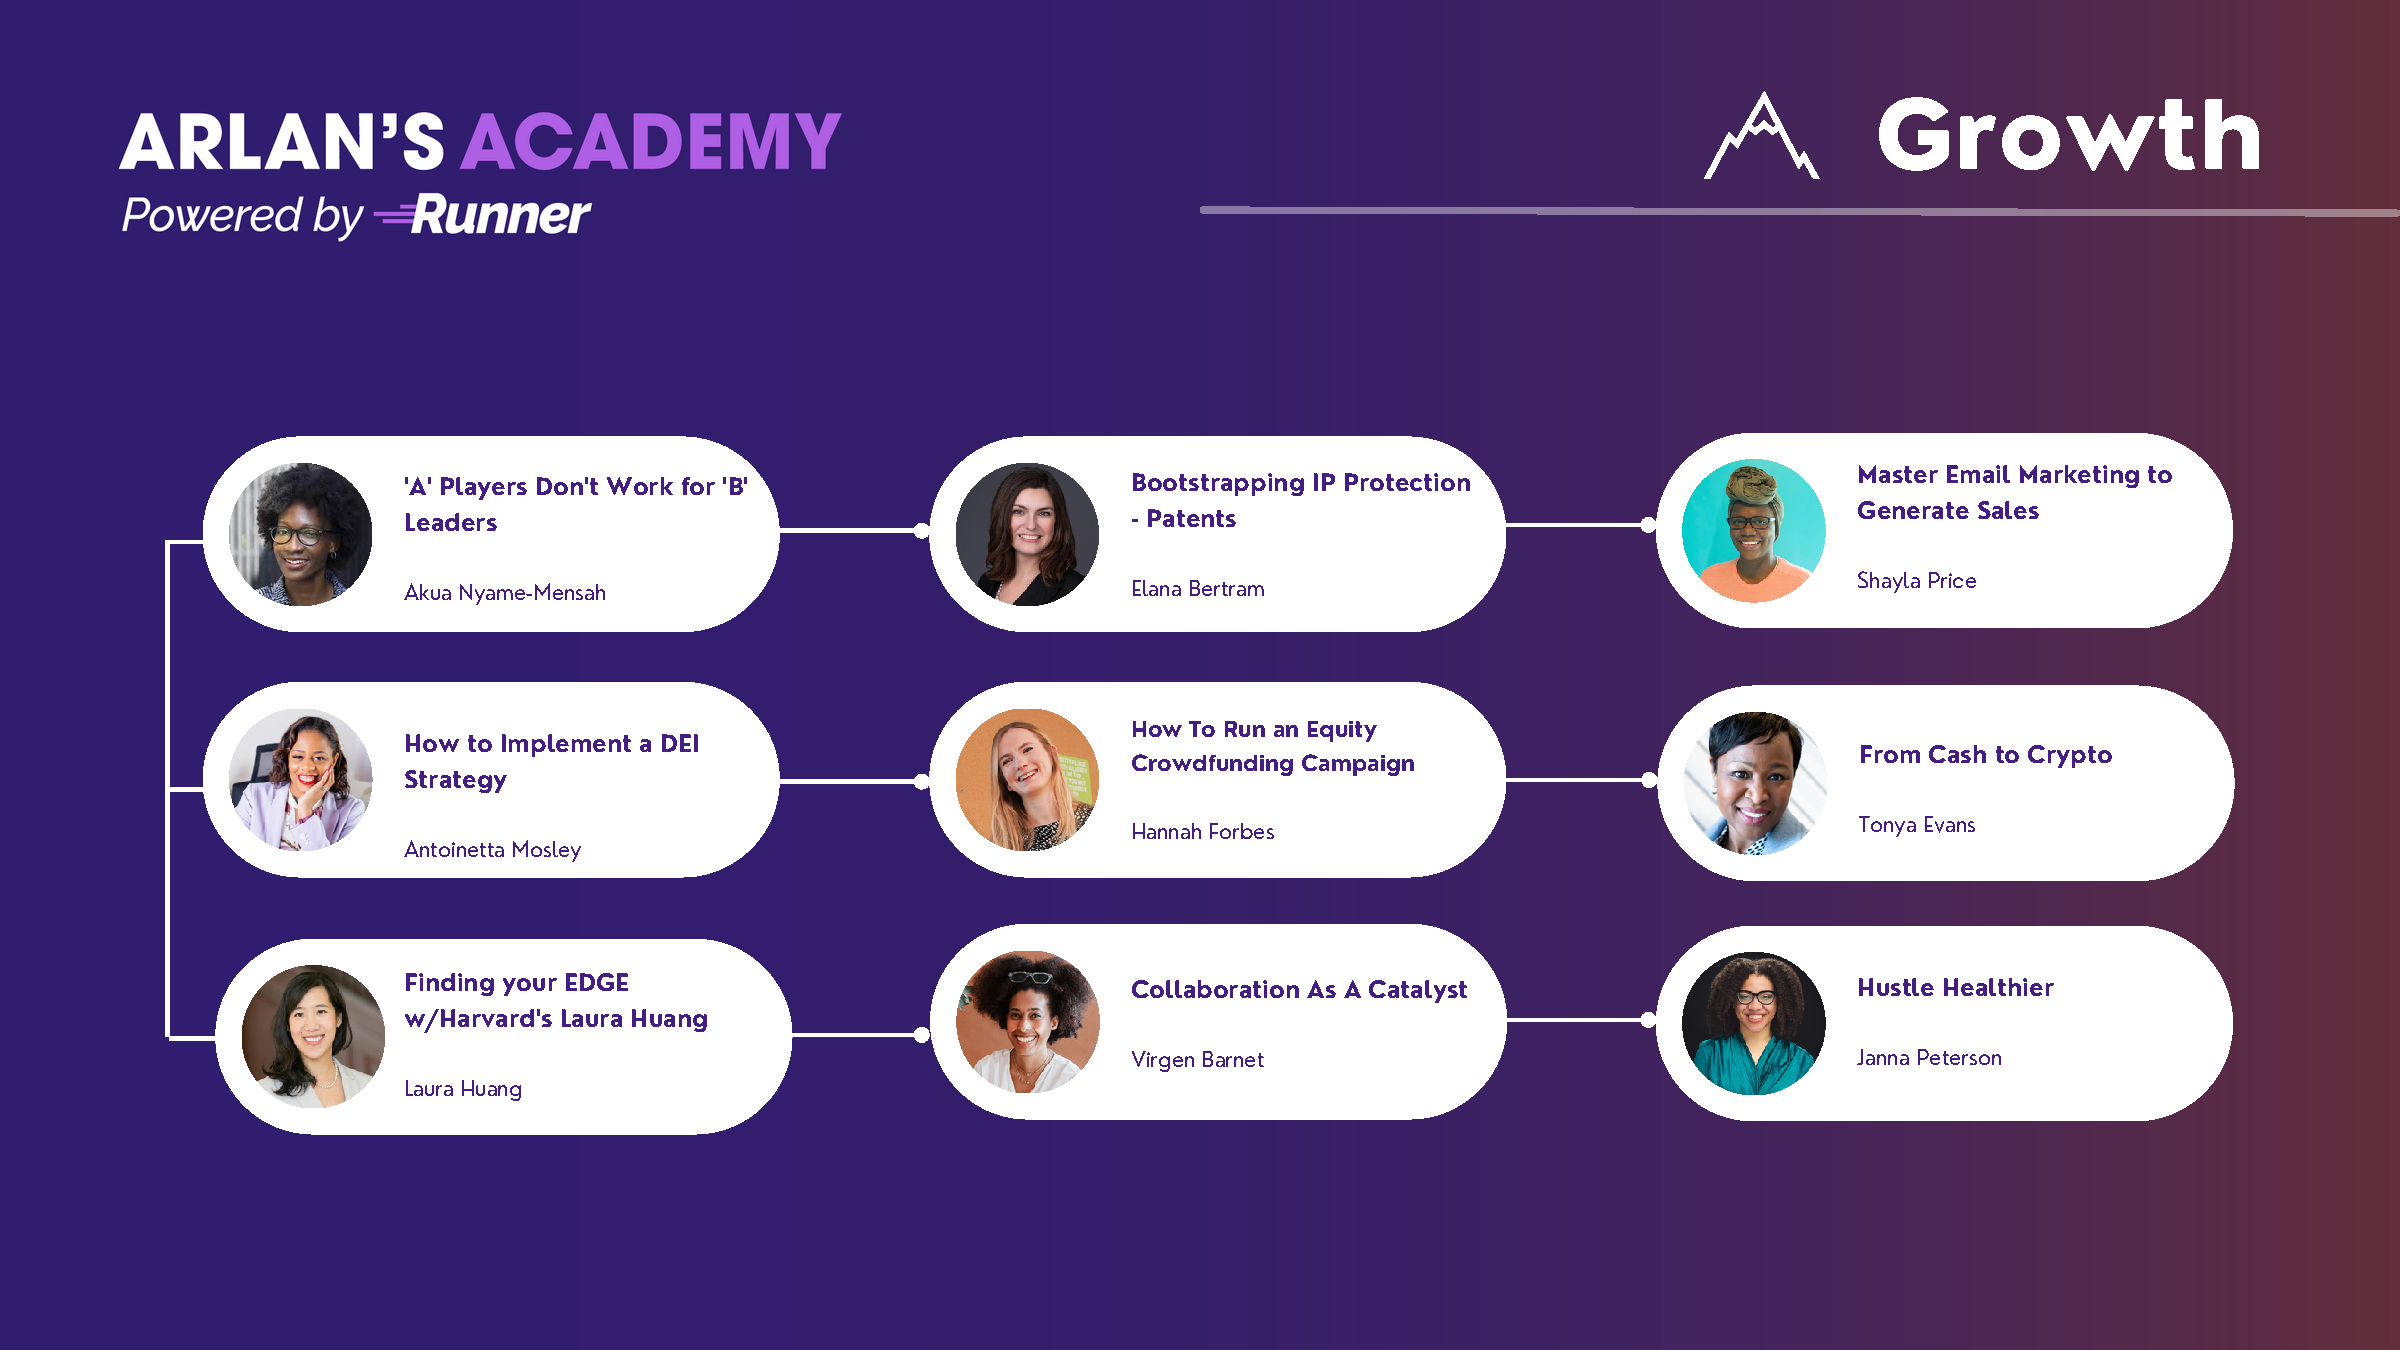 Nine courses are included in Arlan&#39;s Academy Track for Growth. This image lists the nine instructors and their courses related to growth.